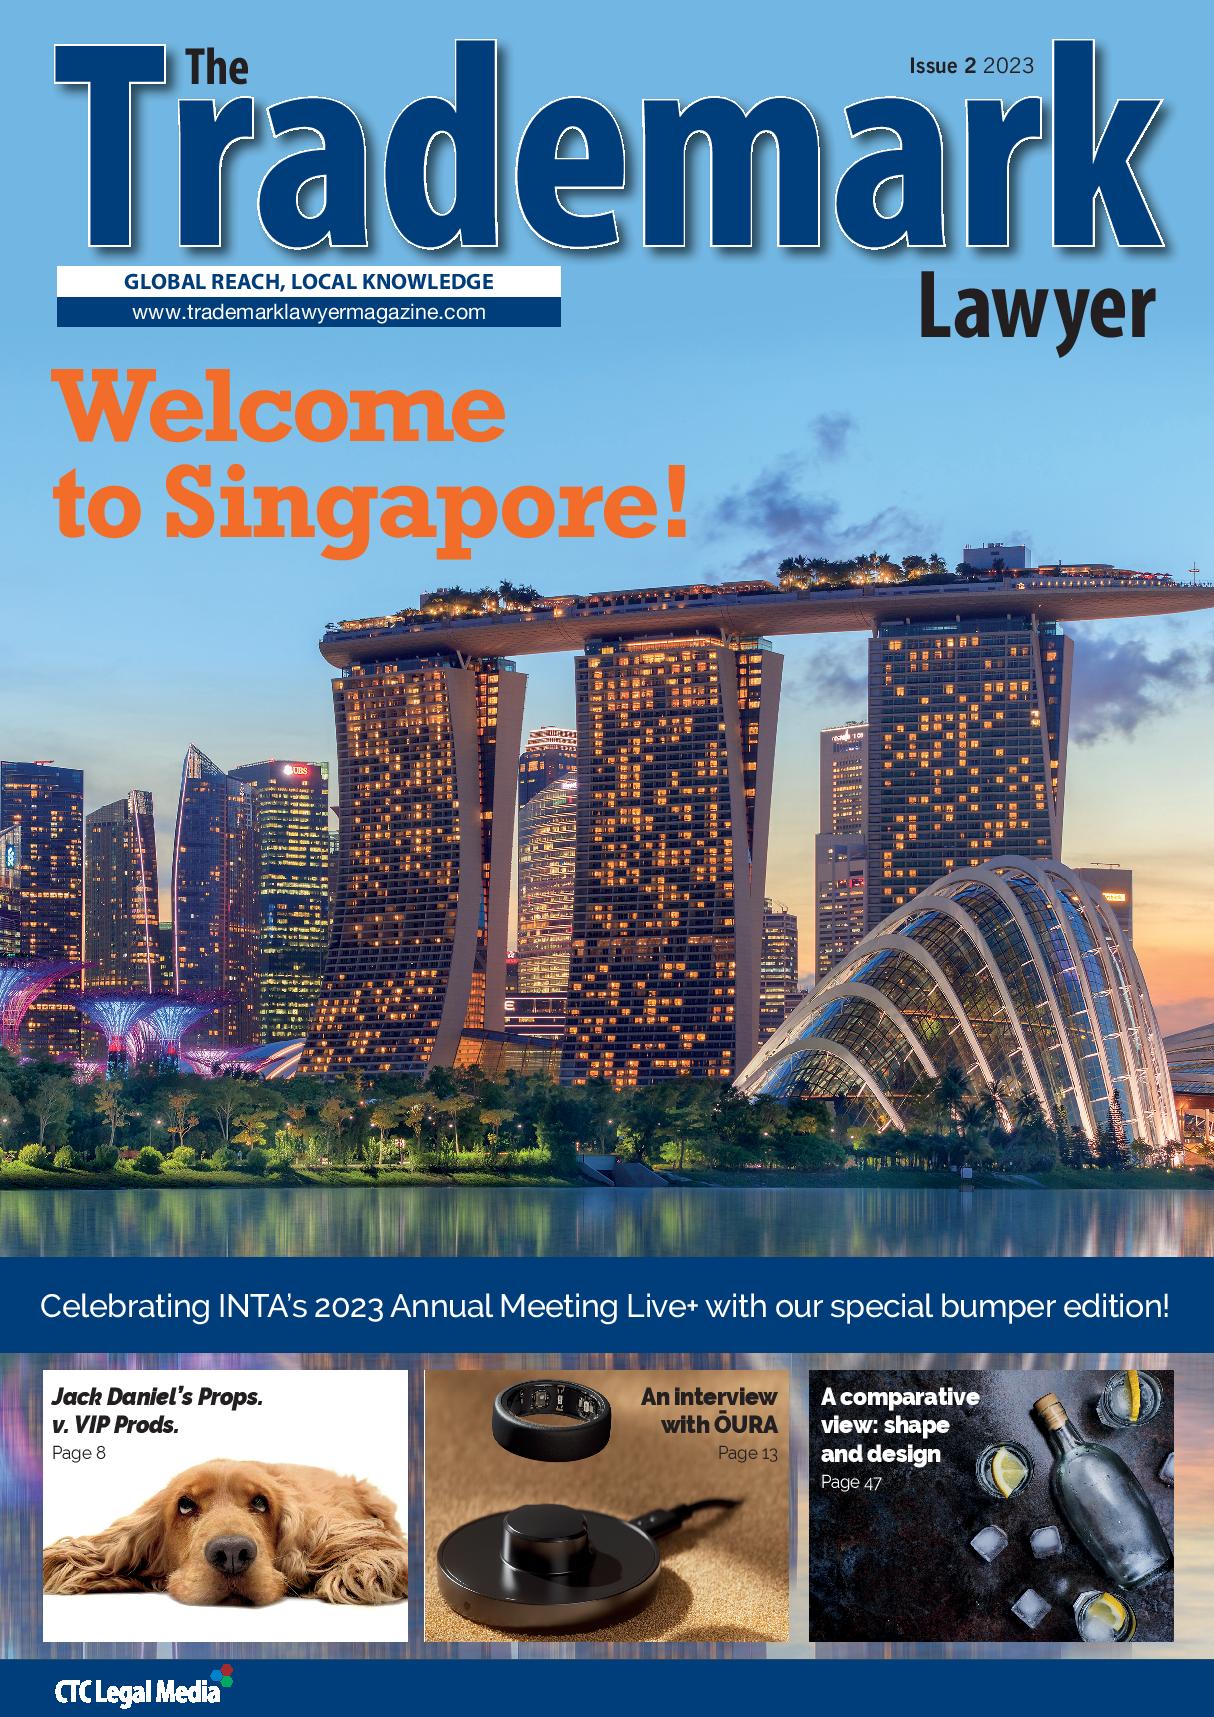 The Trademark Lawyer Issue 2, 2023